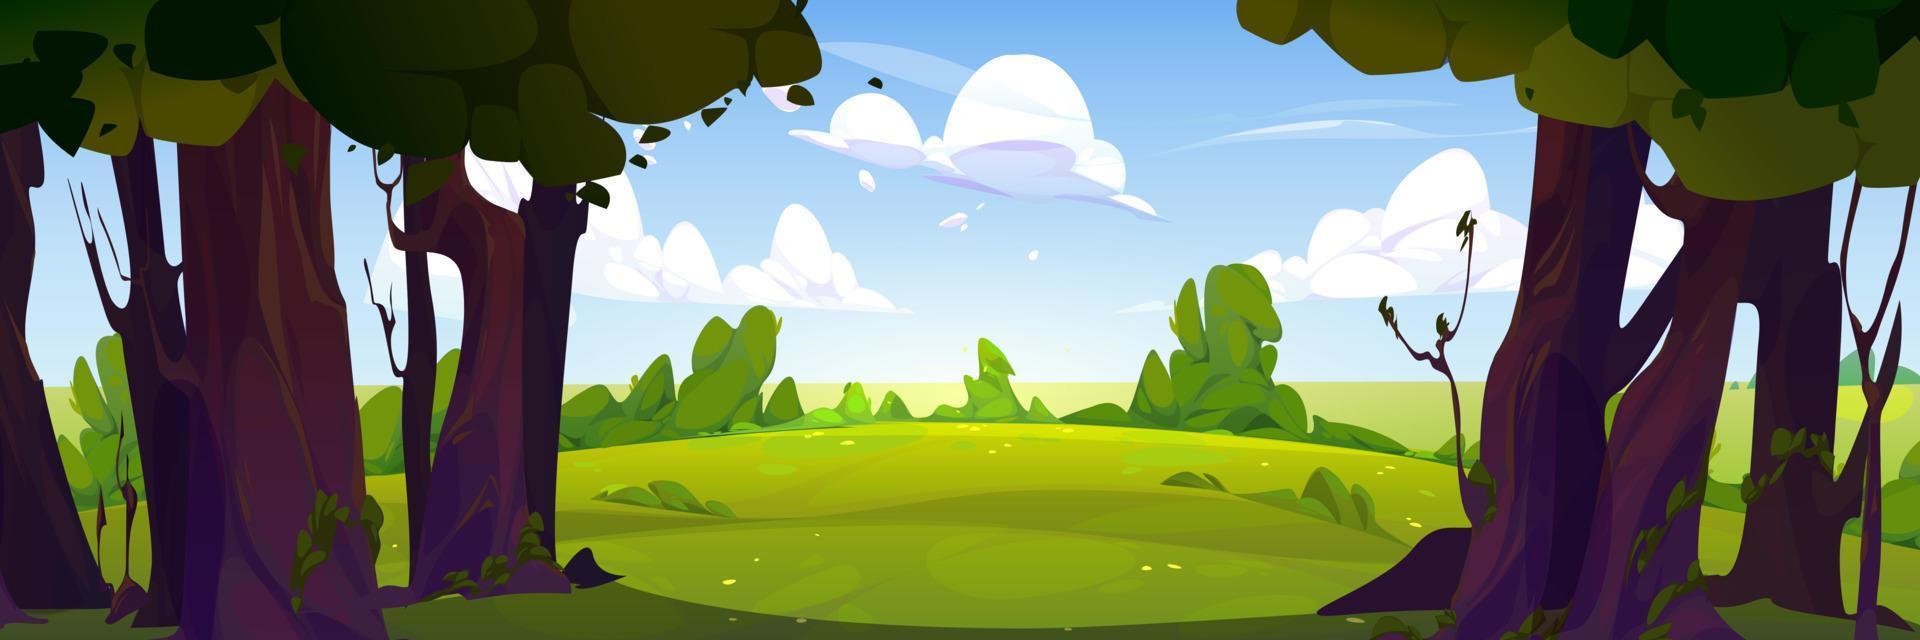 Summer forest landscape with trees, bushes, grass vector